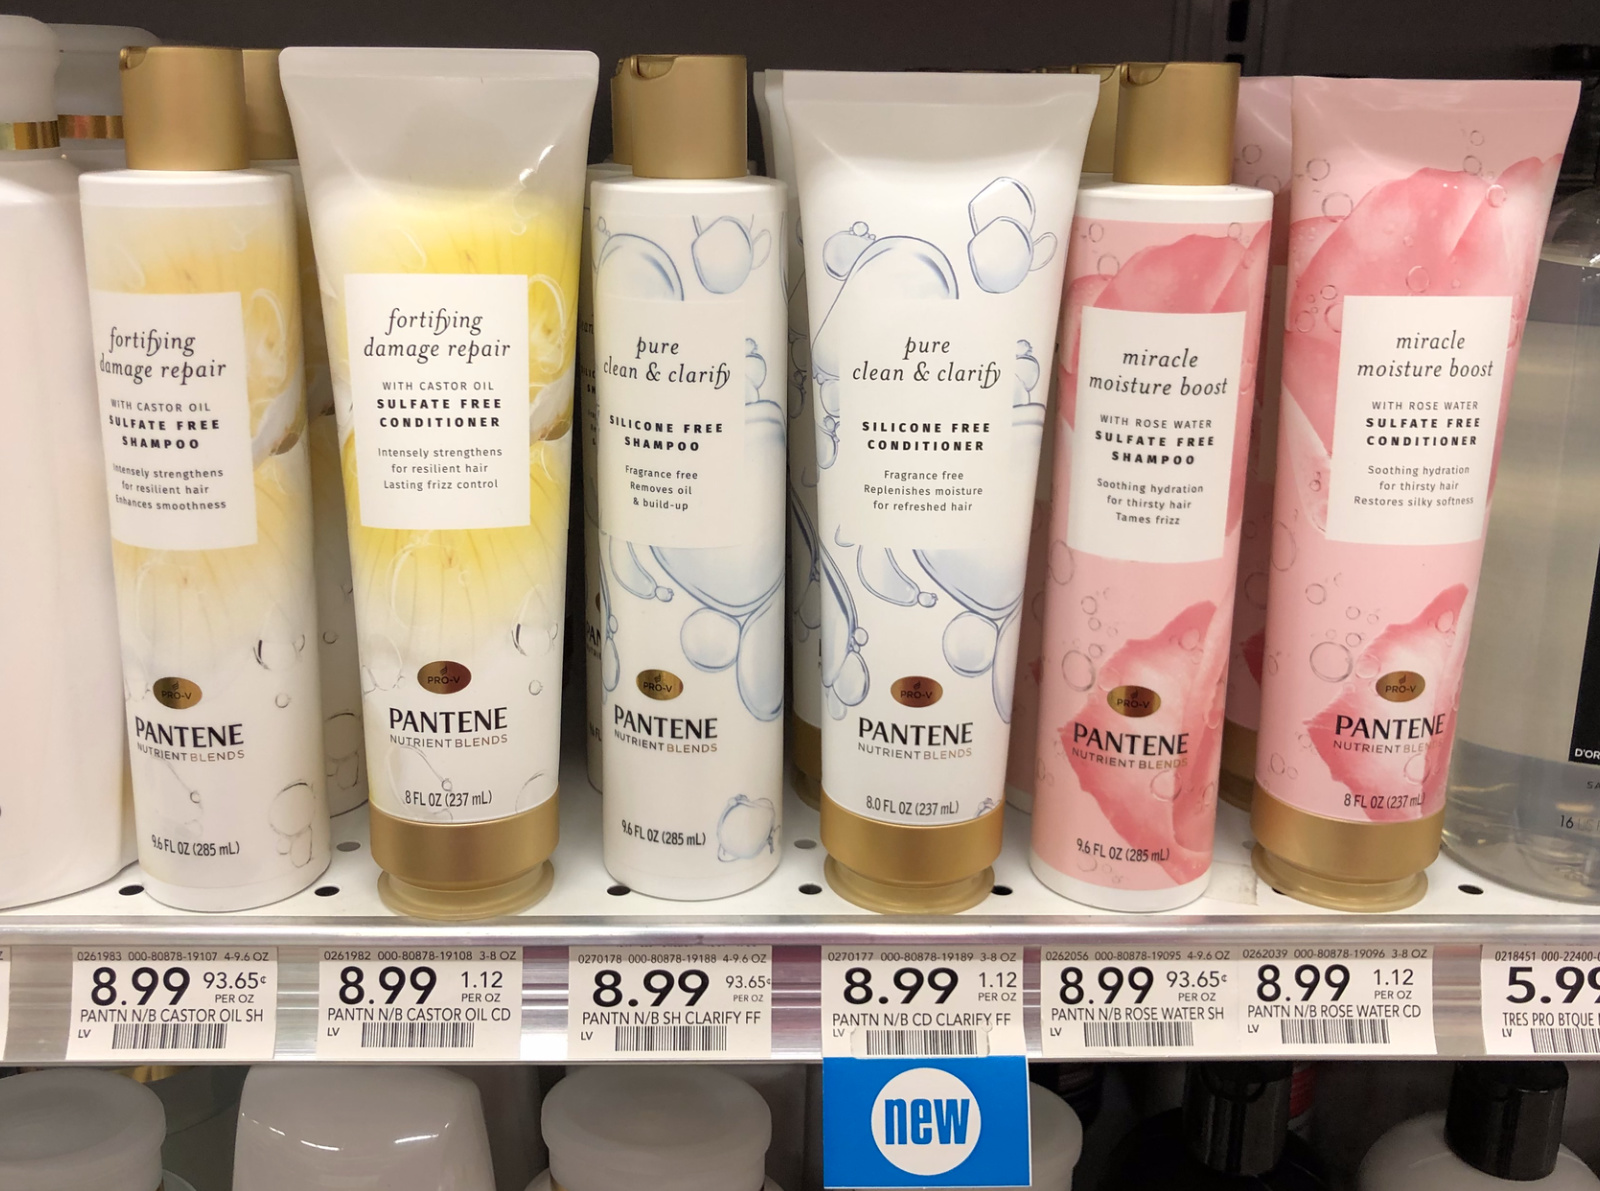 Visit The Publix Beauty Aisle For Big Savings On Lots Of Great New Products! on I Heart Publix 2